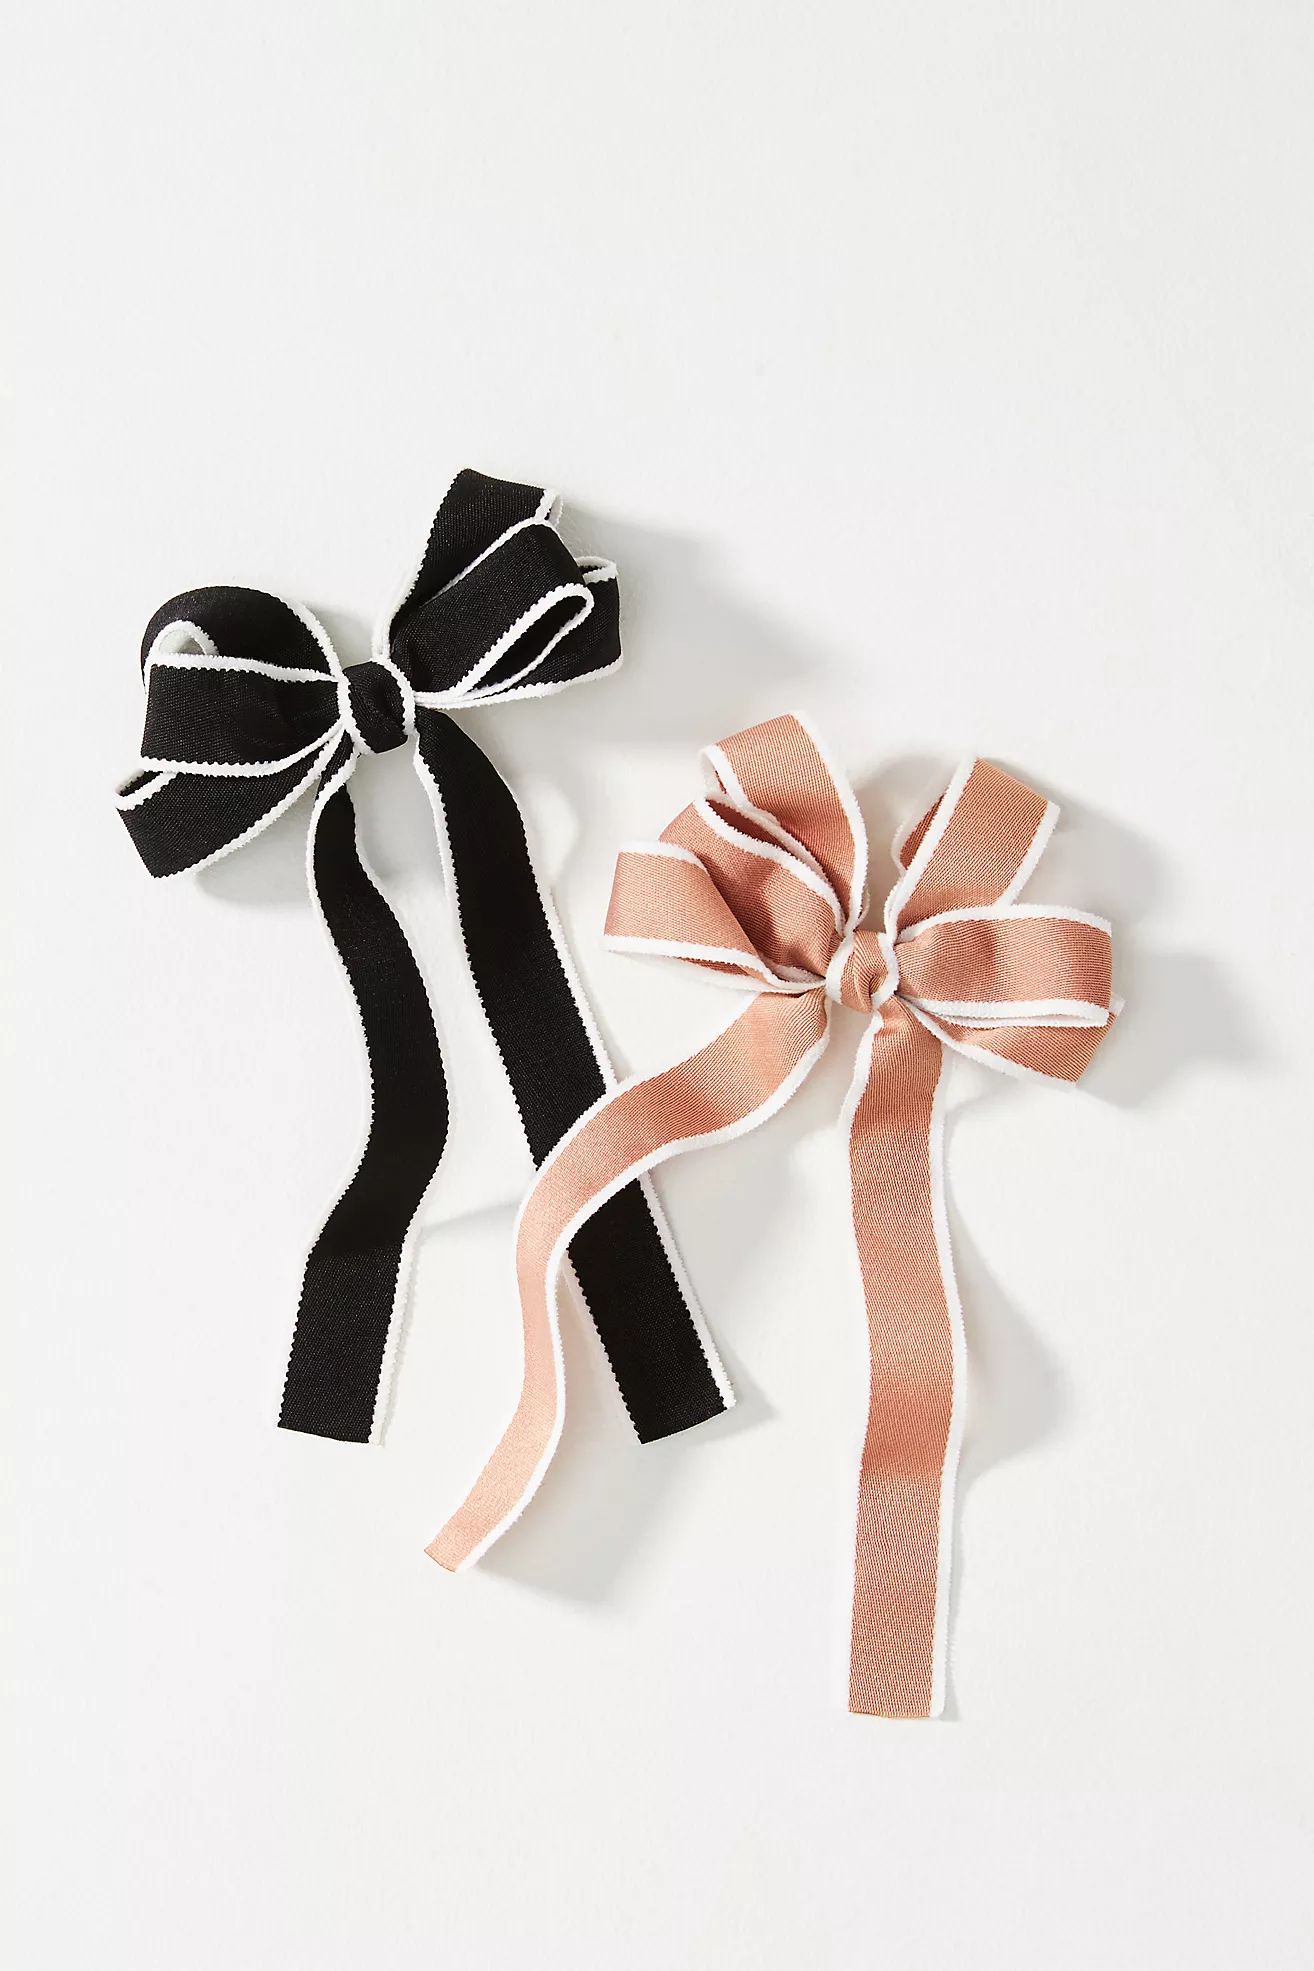 By Anthropologie Clubhouse Trimmed Bows, Set of 2 | Anthropologie (US)